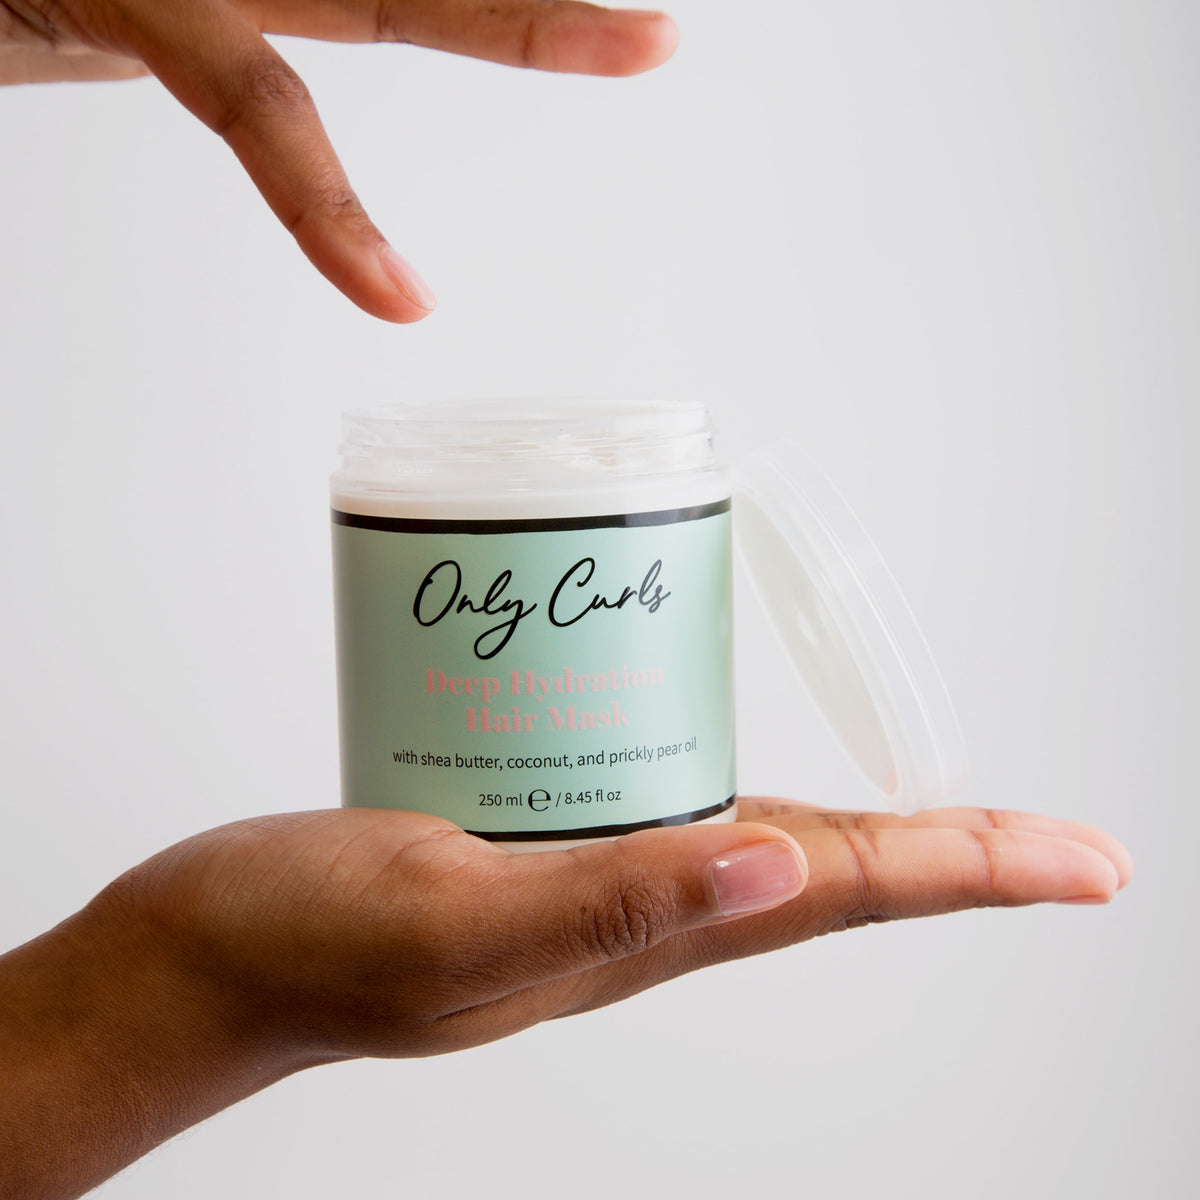 Only Curls Deep Hydration Hair Mask using finger to sample